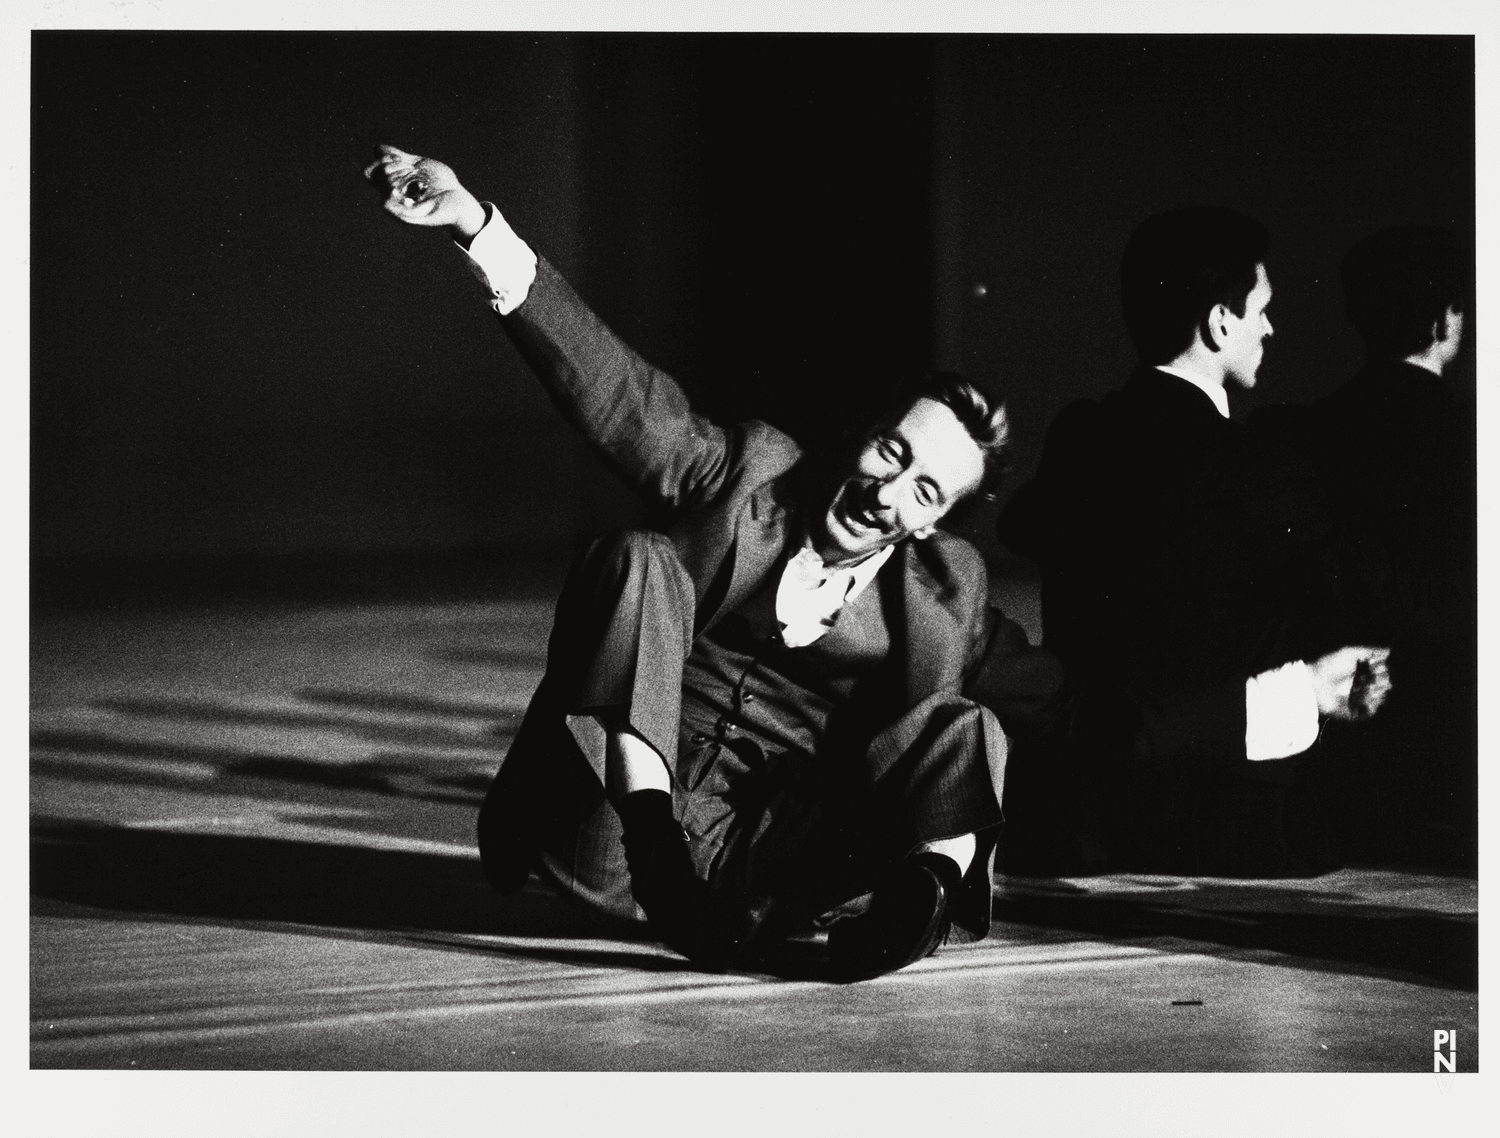 Dominique Mercy and Francis Viet in “Two Cigarettes in the Dark” by Pina Bausch